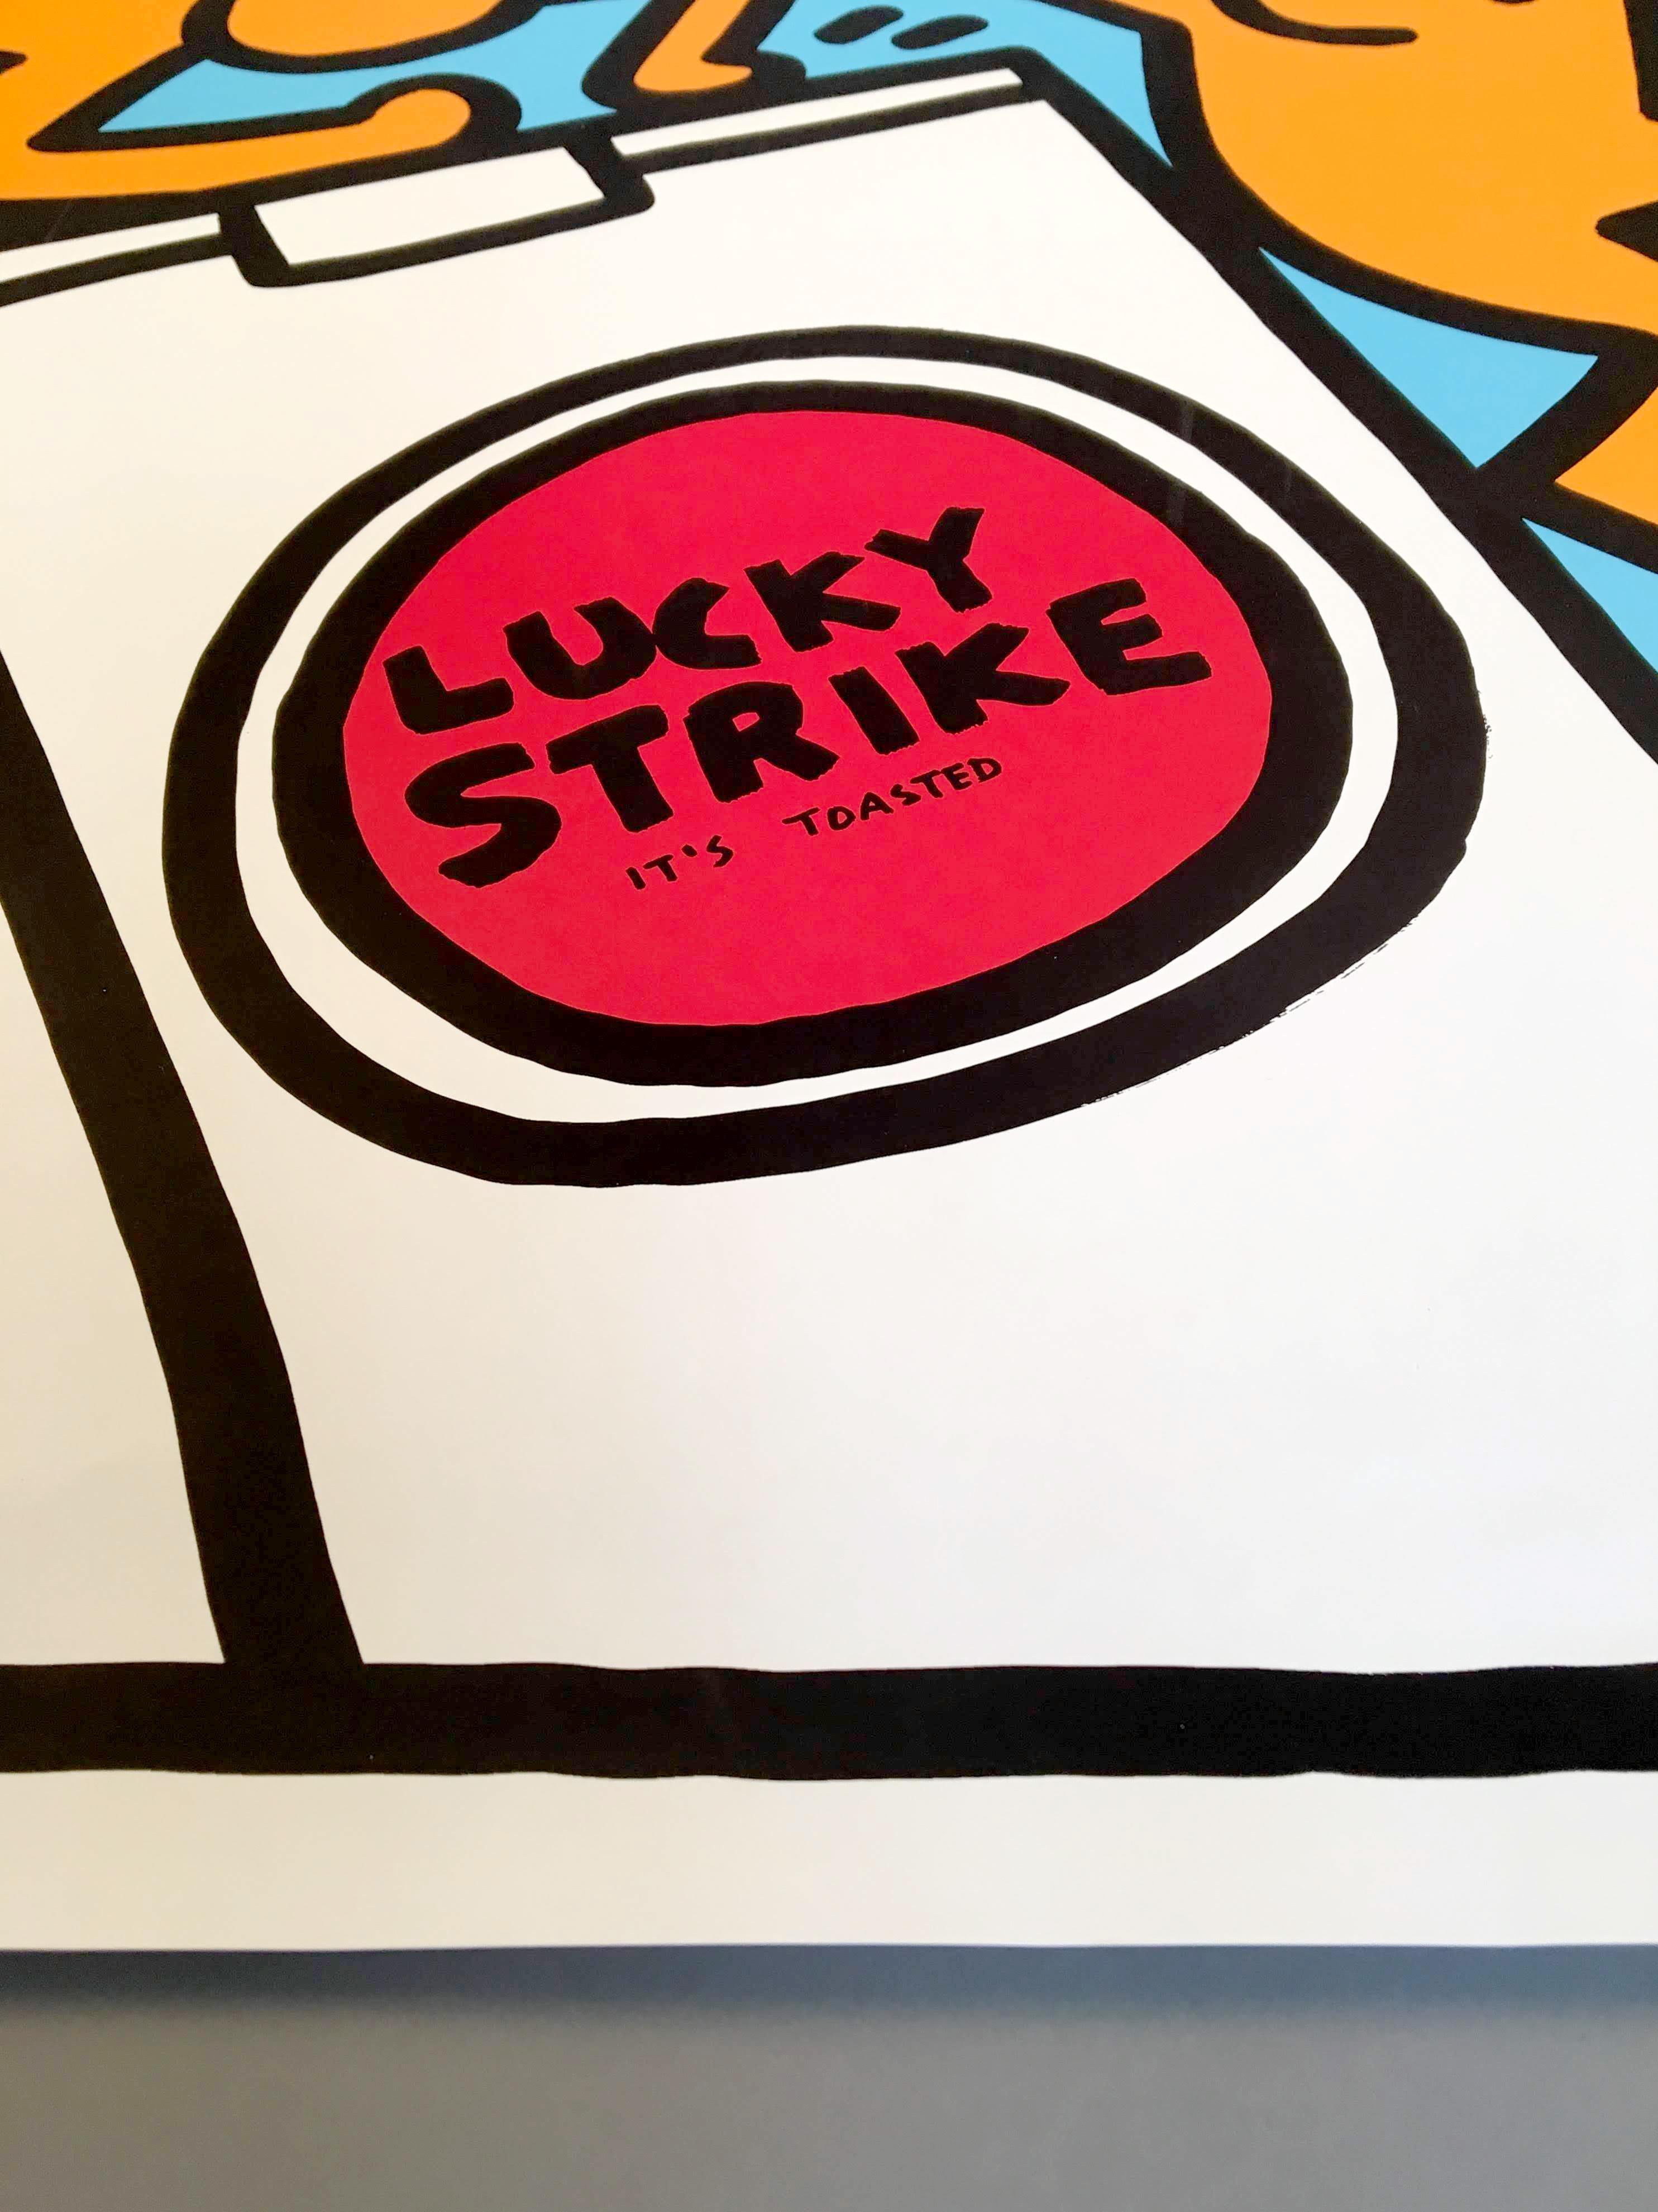 Keith Haring 'Lucky Strike III' Rare Original 1987 Poster Print on Wove Paper In Excellent Condition For Sale In Frederiksberg, Copenhagen